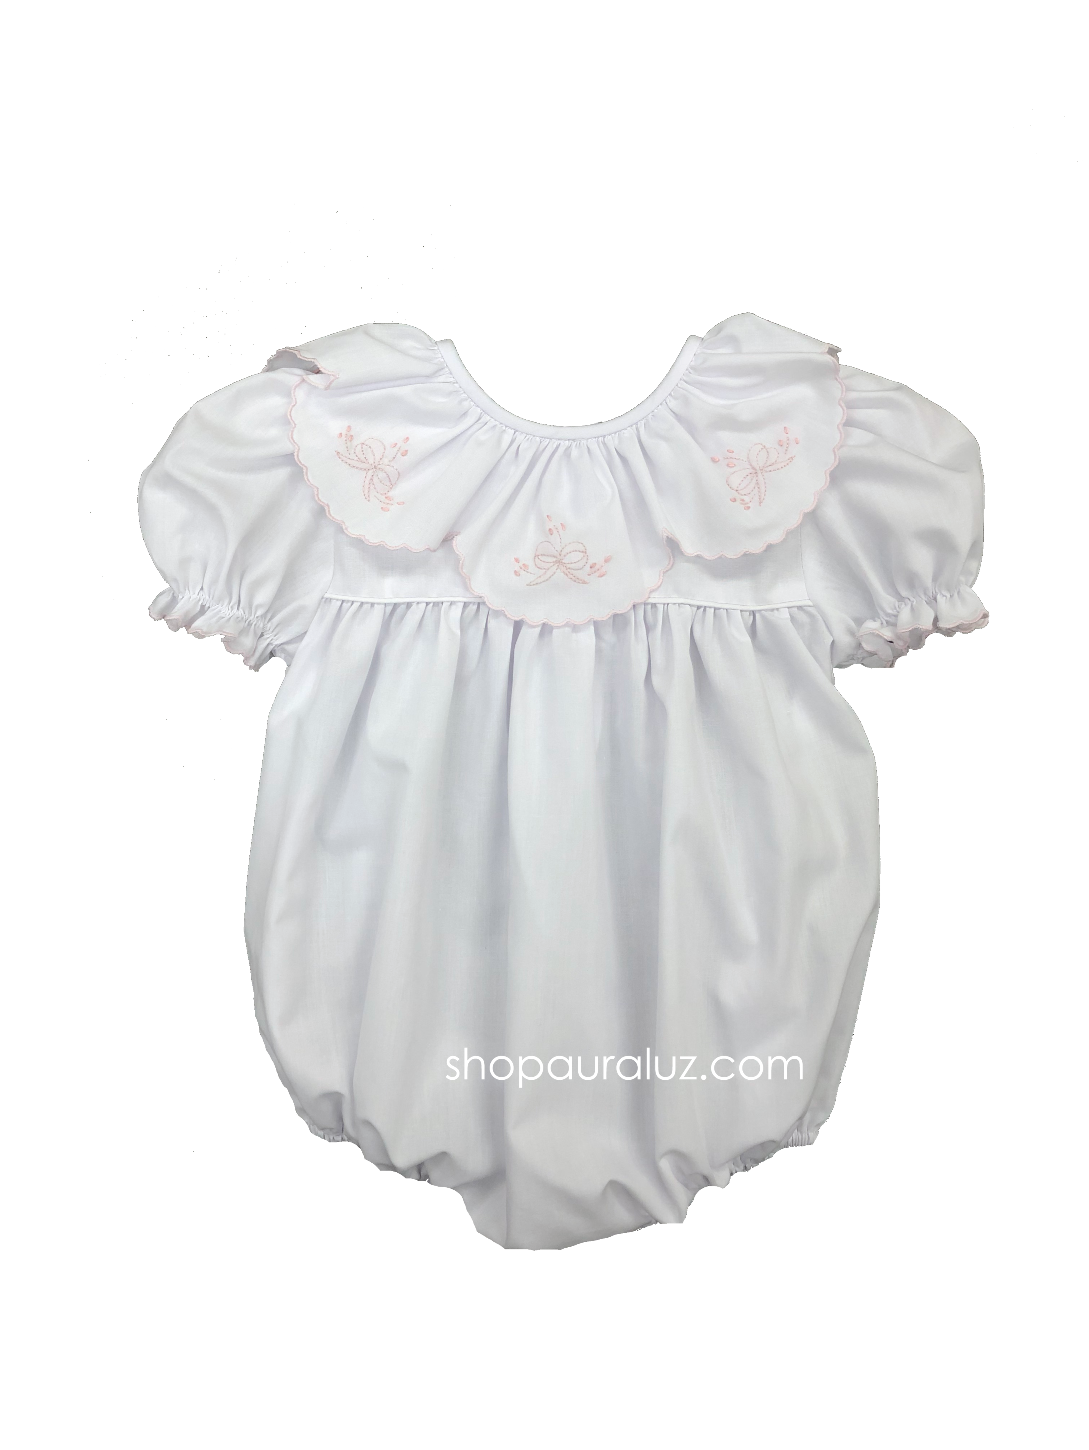 Auraluz Bubble...White with ruffle collar and pink embroidered bows